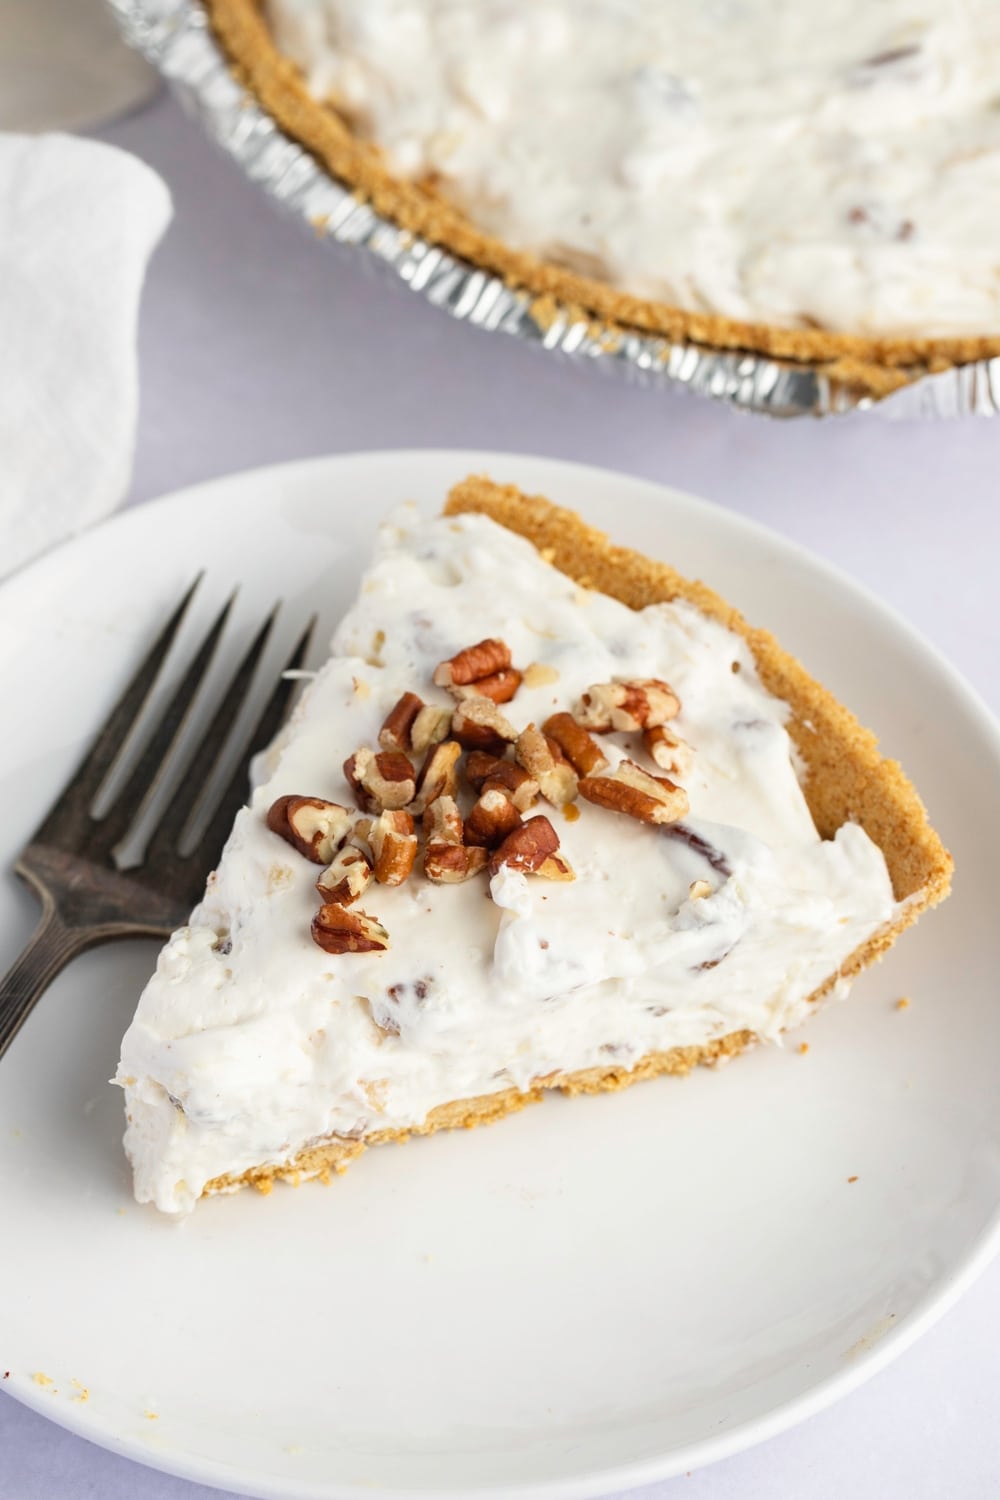 A slice of creamy millionaire pie with chopped pecans on top.